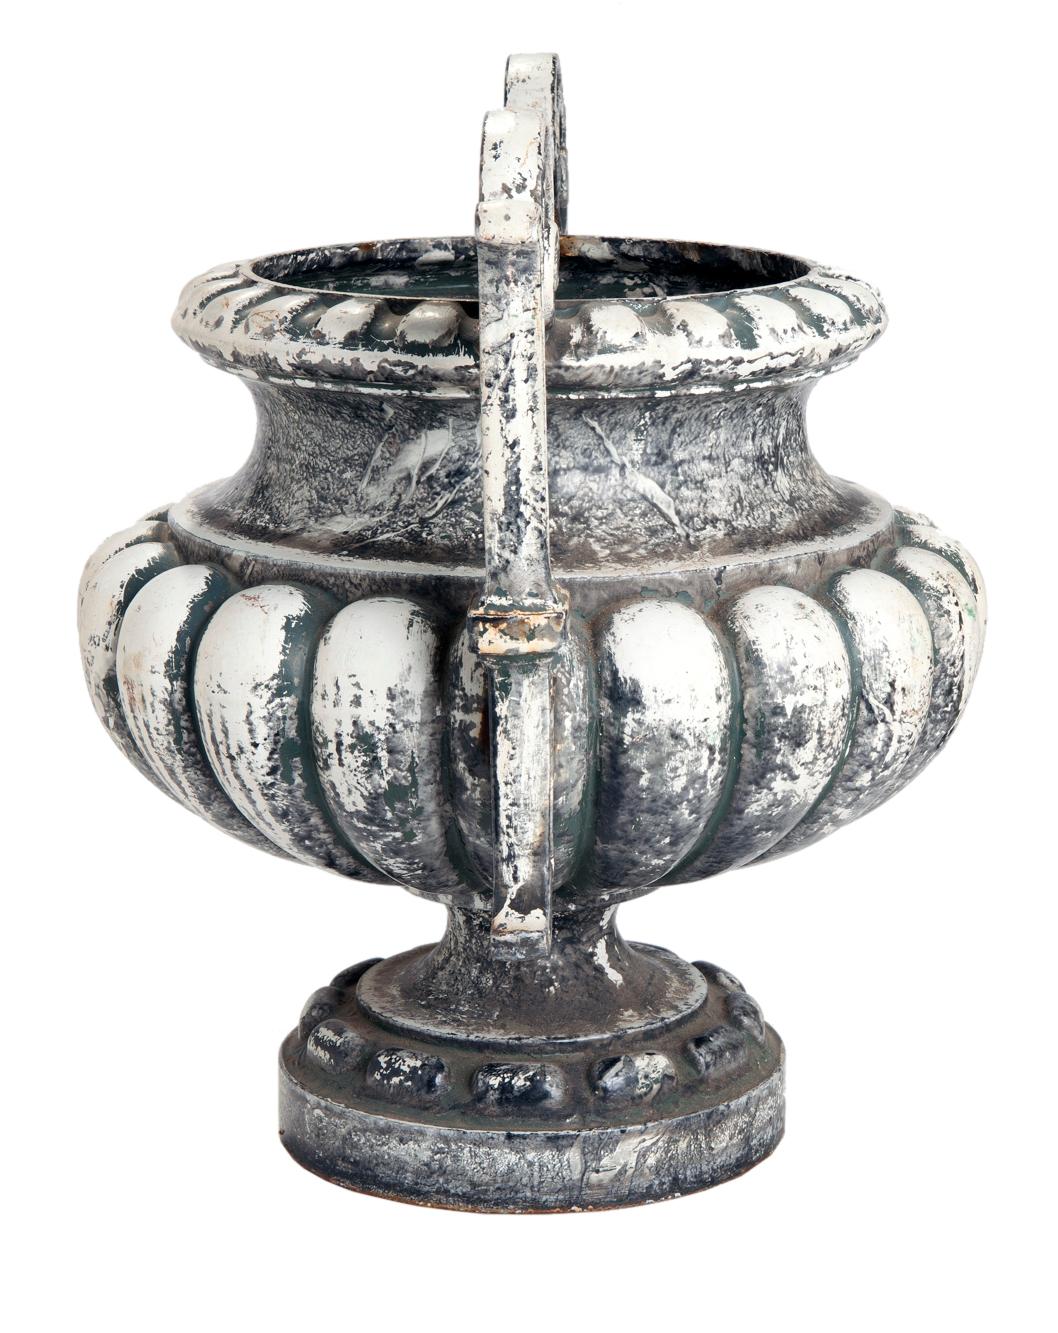 Hand-Crafted French, Enameled Garden Urn, circa 1880